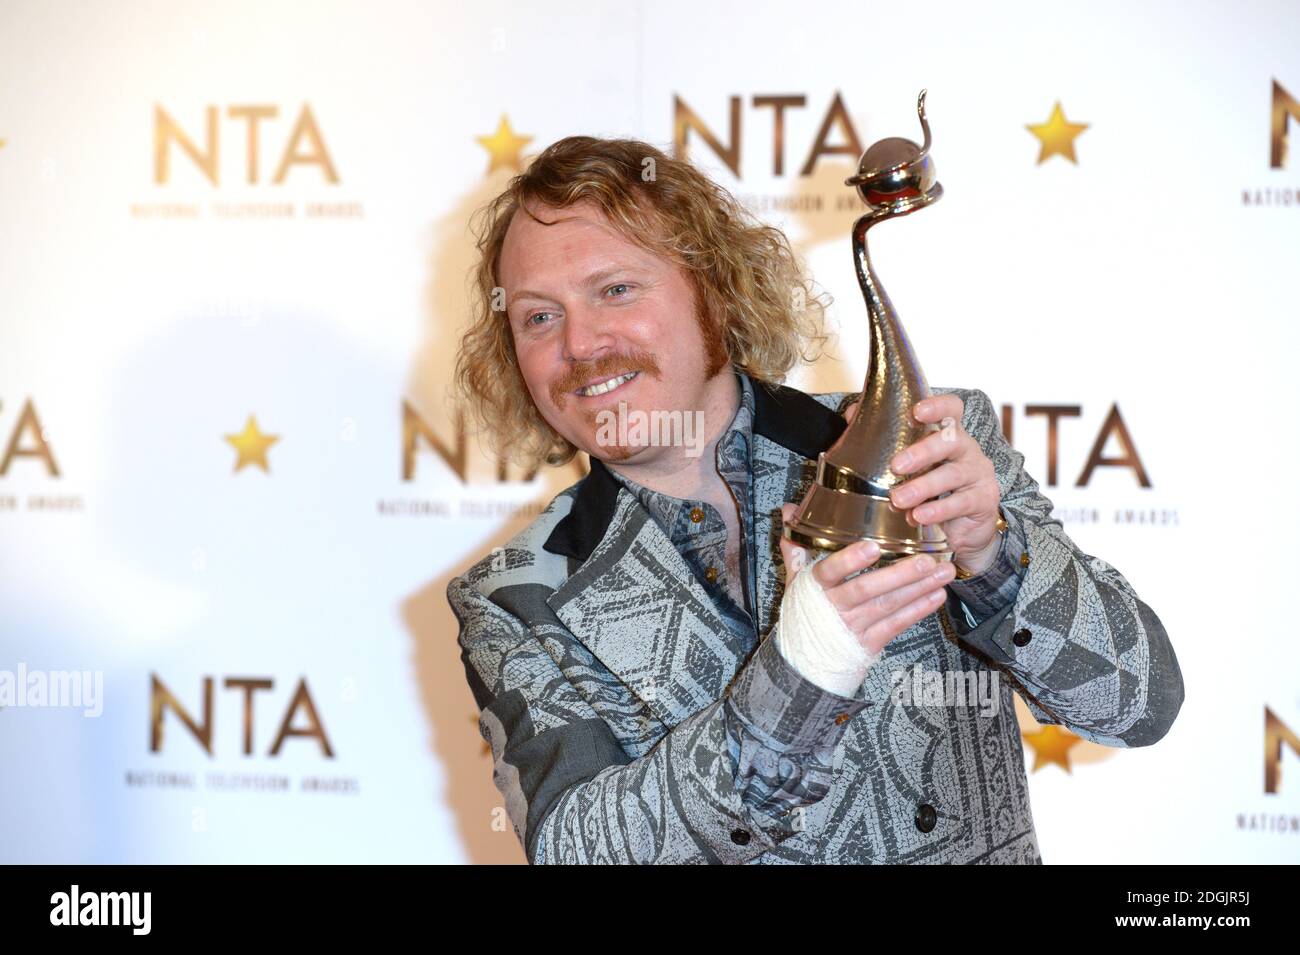 Keith Lemon with the Award for Best Multichannel Show (Celebrity Juice) in the press room at the National Television Awards 2015, held at the O2 Arena, London  This year the NTA's are celebrating their 20th year. Stock Photo